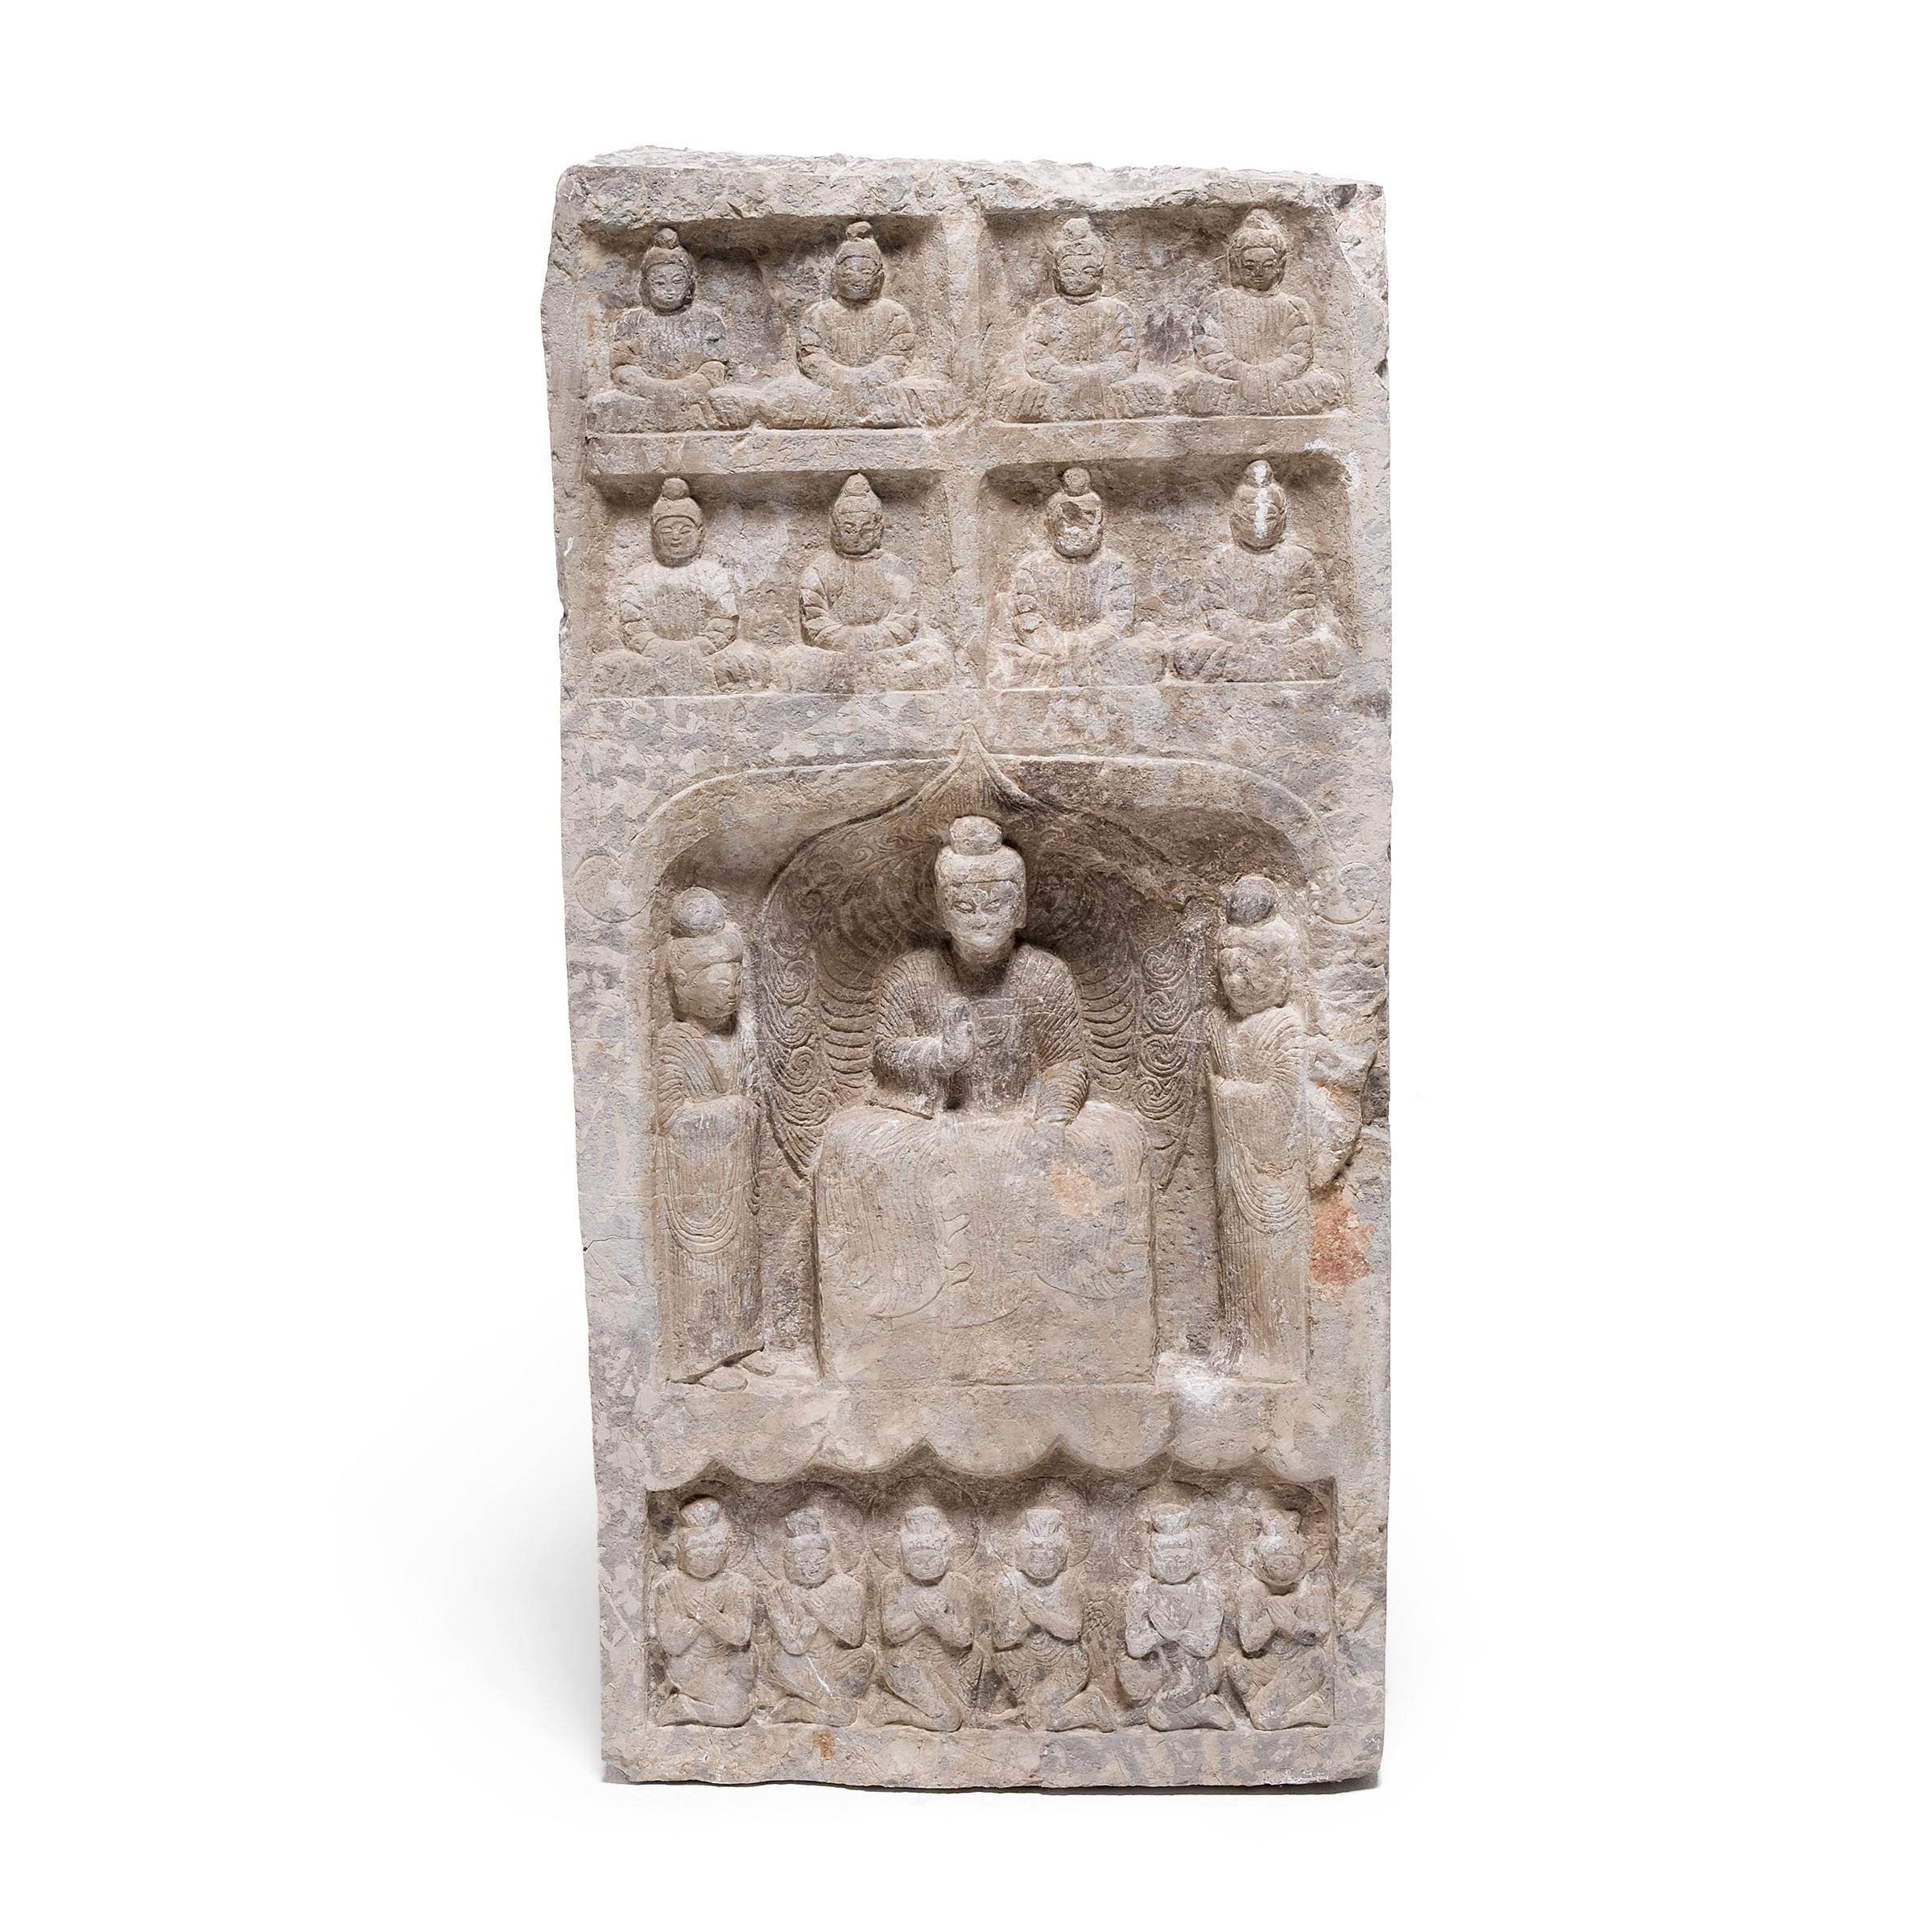 This incredible stone pedestal dates to the mid-19th century and likely originated as a stele monument or a segment of a large temple column. The square pedestal is carved in relief on all sides with Buddhist imagery in the Northern Wei style. A